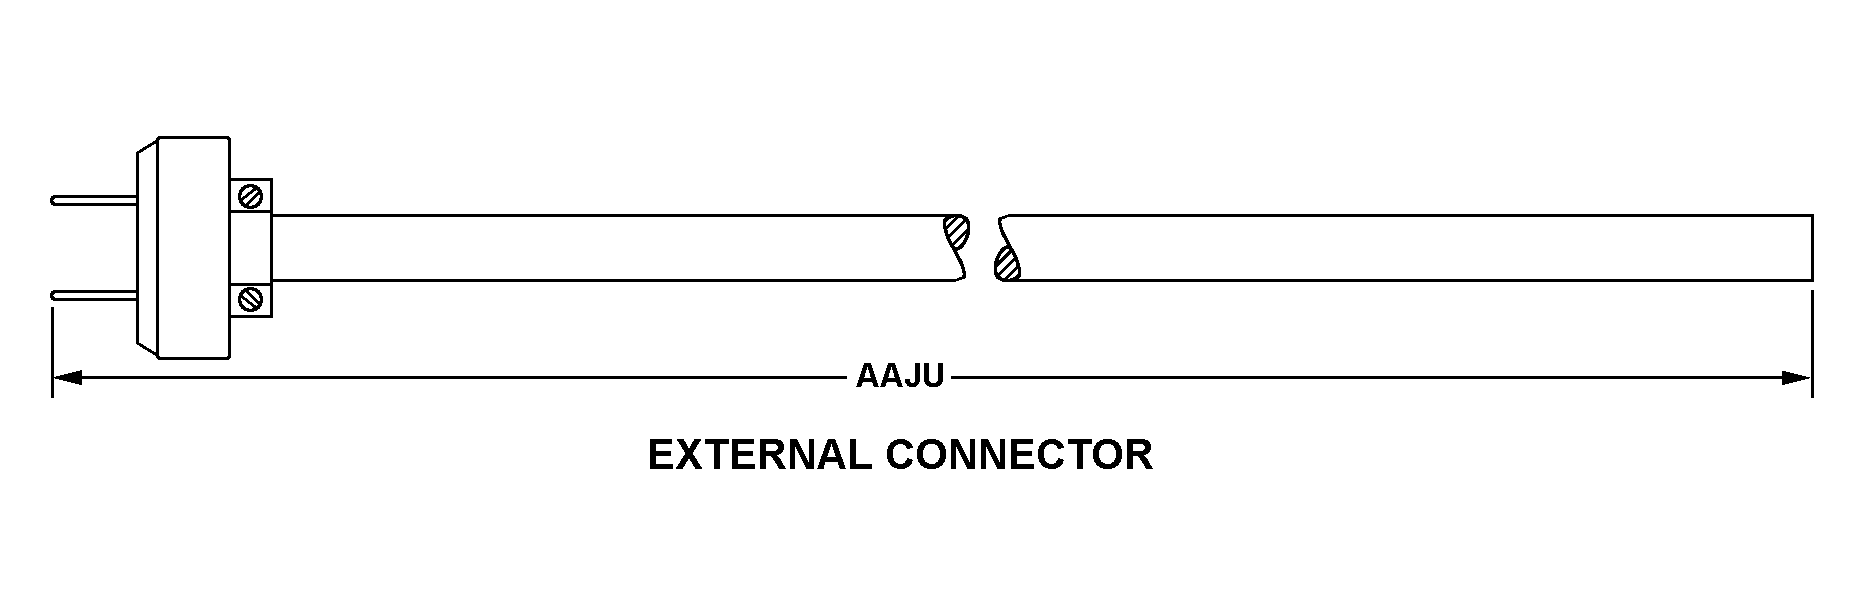 EXTERNAL CONNECTOR style nsn 6150-01-235-8369